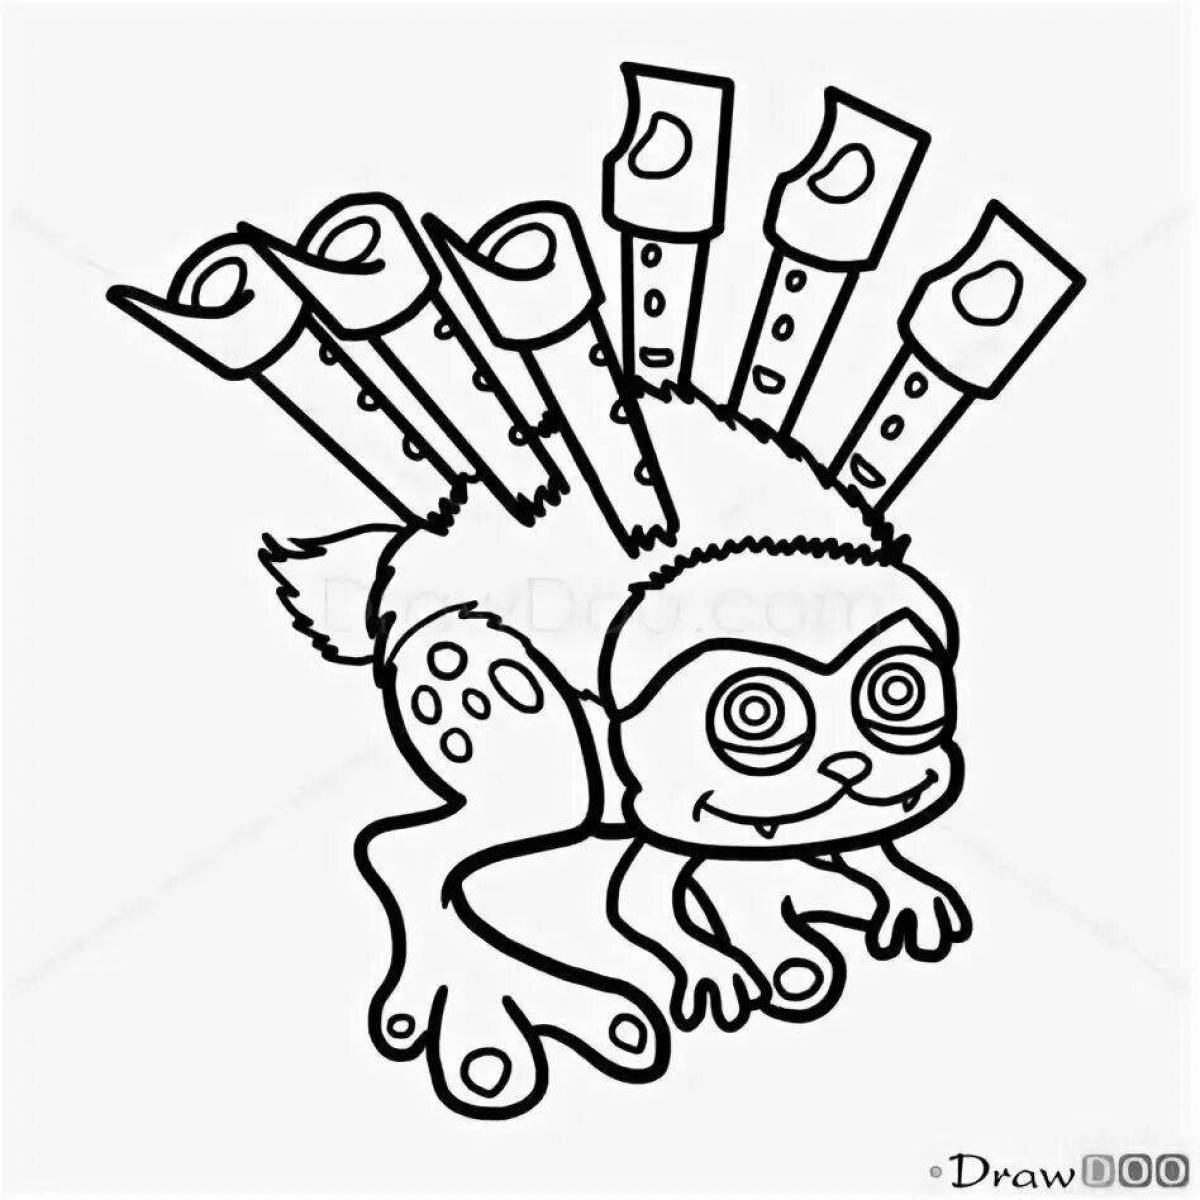 Radiant mai singing monster coloring page